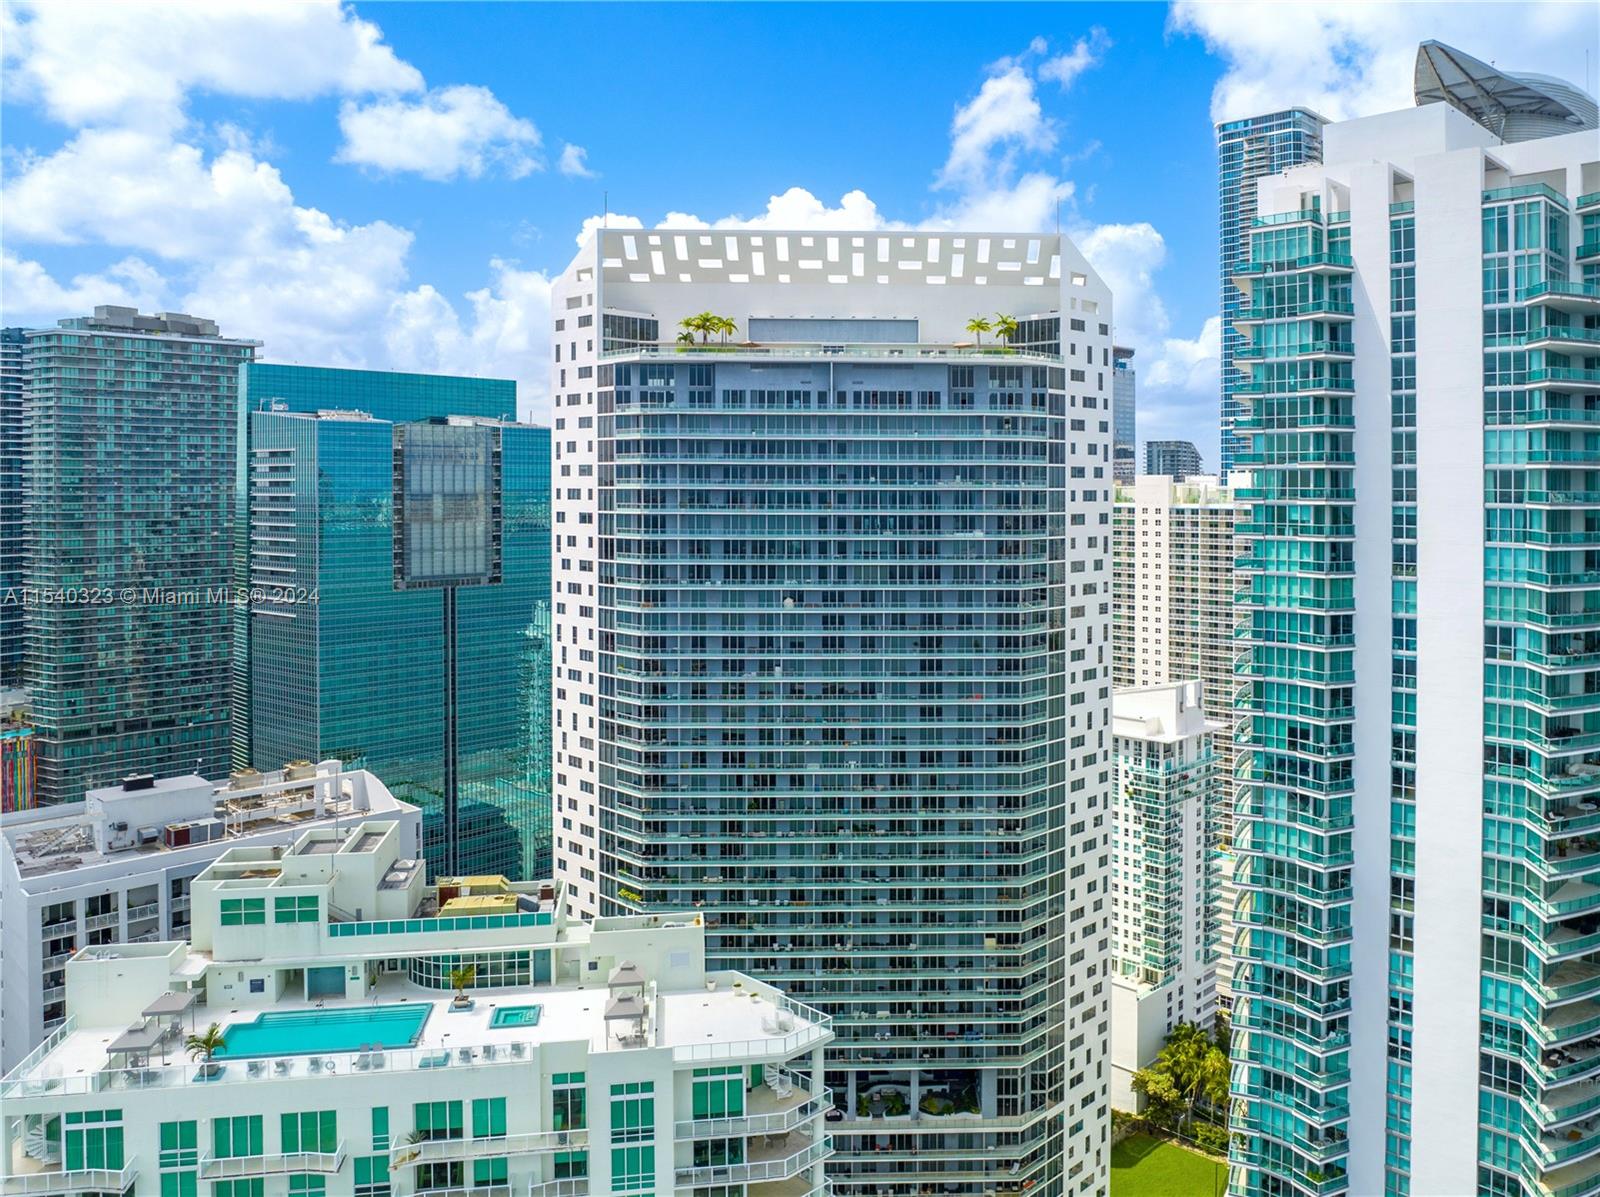 A fantastic unit at the much sought after Brickell House in Brickell. Incredible location by the Bay of Biscayne and yet a short walk away from all the action Brickell and Downtown Miami has to offer. This 2 bedroom 2 1/2 bathroom unit is upgraded and comes with large porcelain tile floors throughout, a beautifully designed interior that's sleek and stylish, a well-equipped kitchen with an island, living room and dining room.  Bedrooms come with built-out closets each with an en-suite bathroom. Flat screen TV's and cable and internet provided.
Building features all the modern amenities including 2 pools, hot tub, fitness center with spa, theater room, two lounges, kids room and 24hr concierge, valet and security.